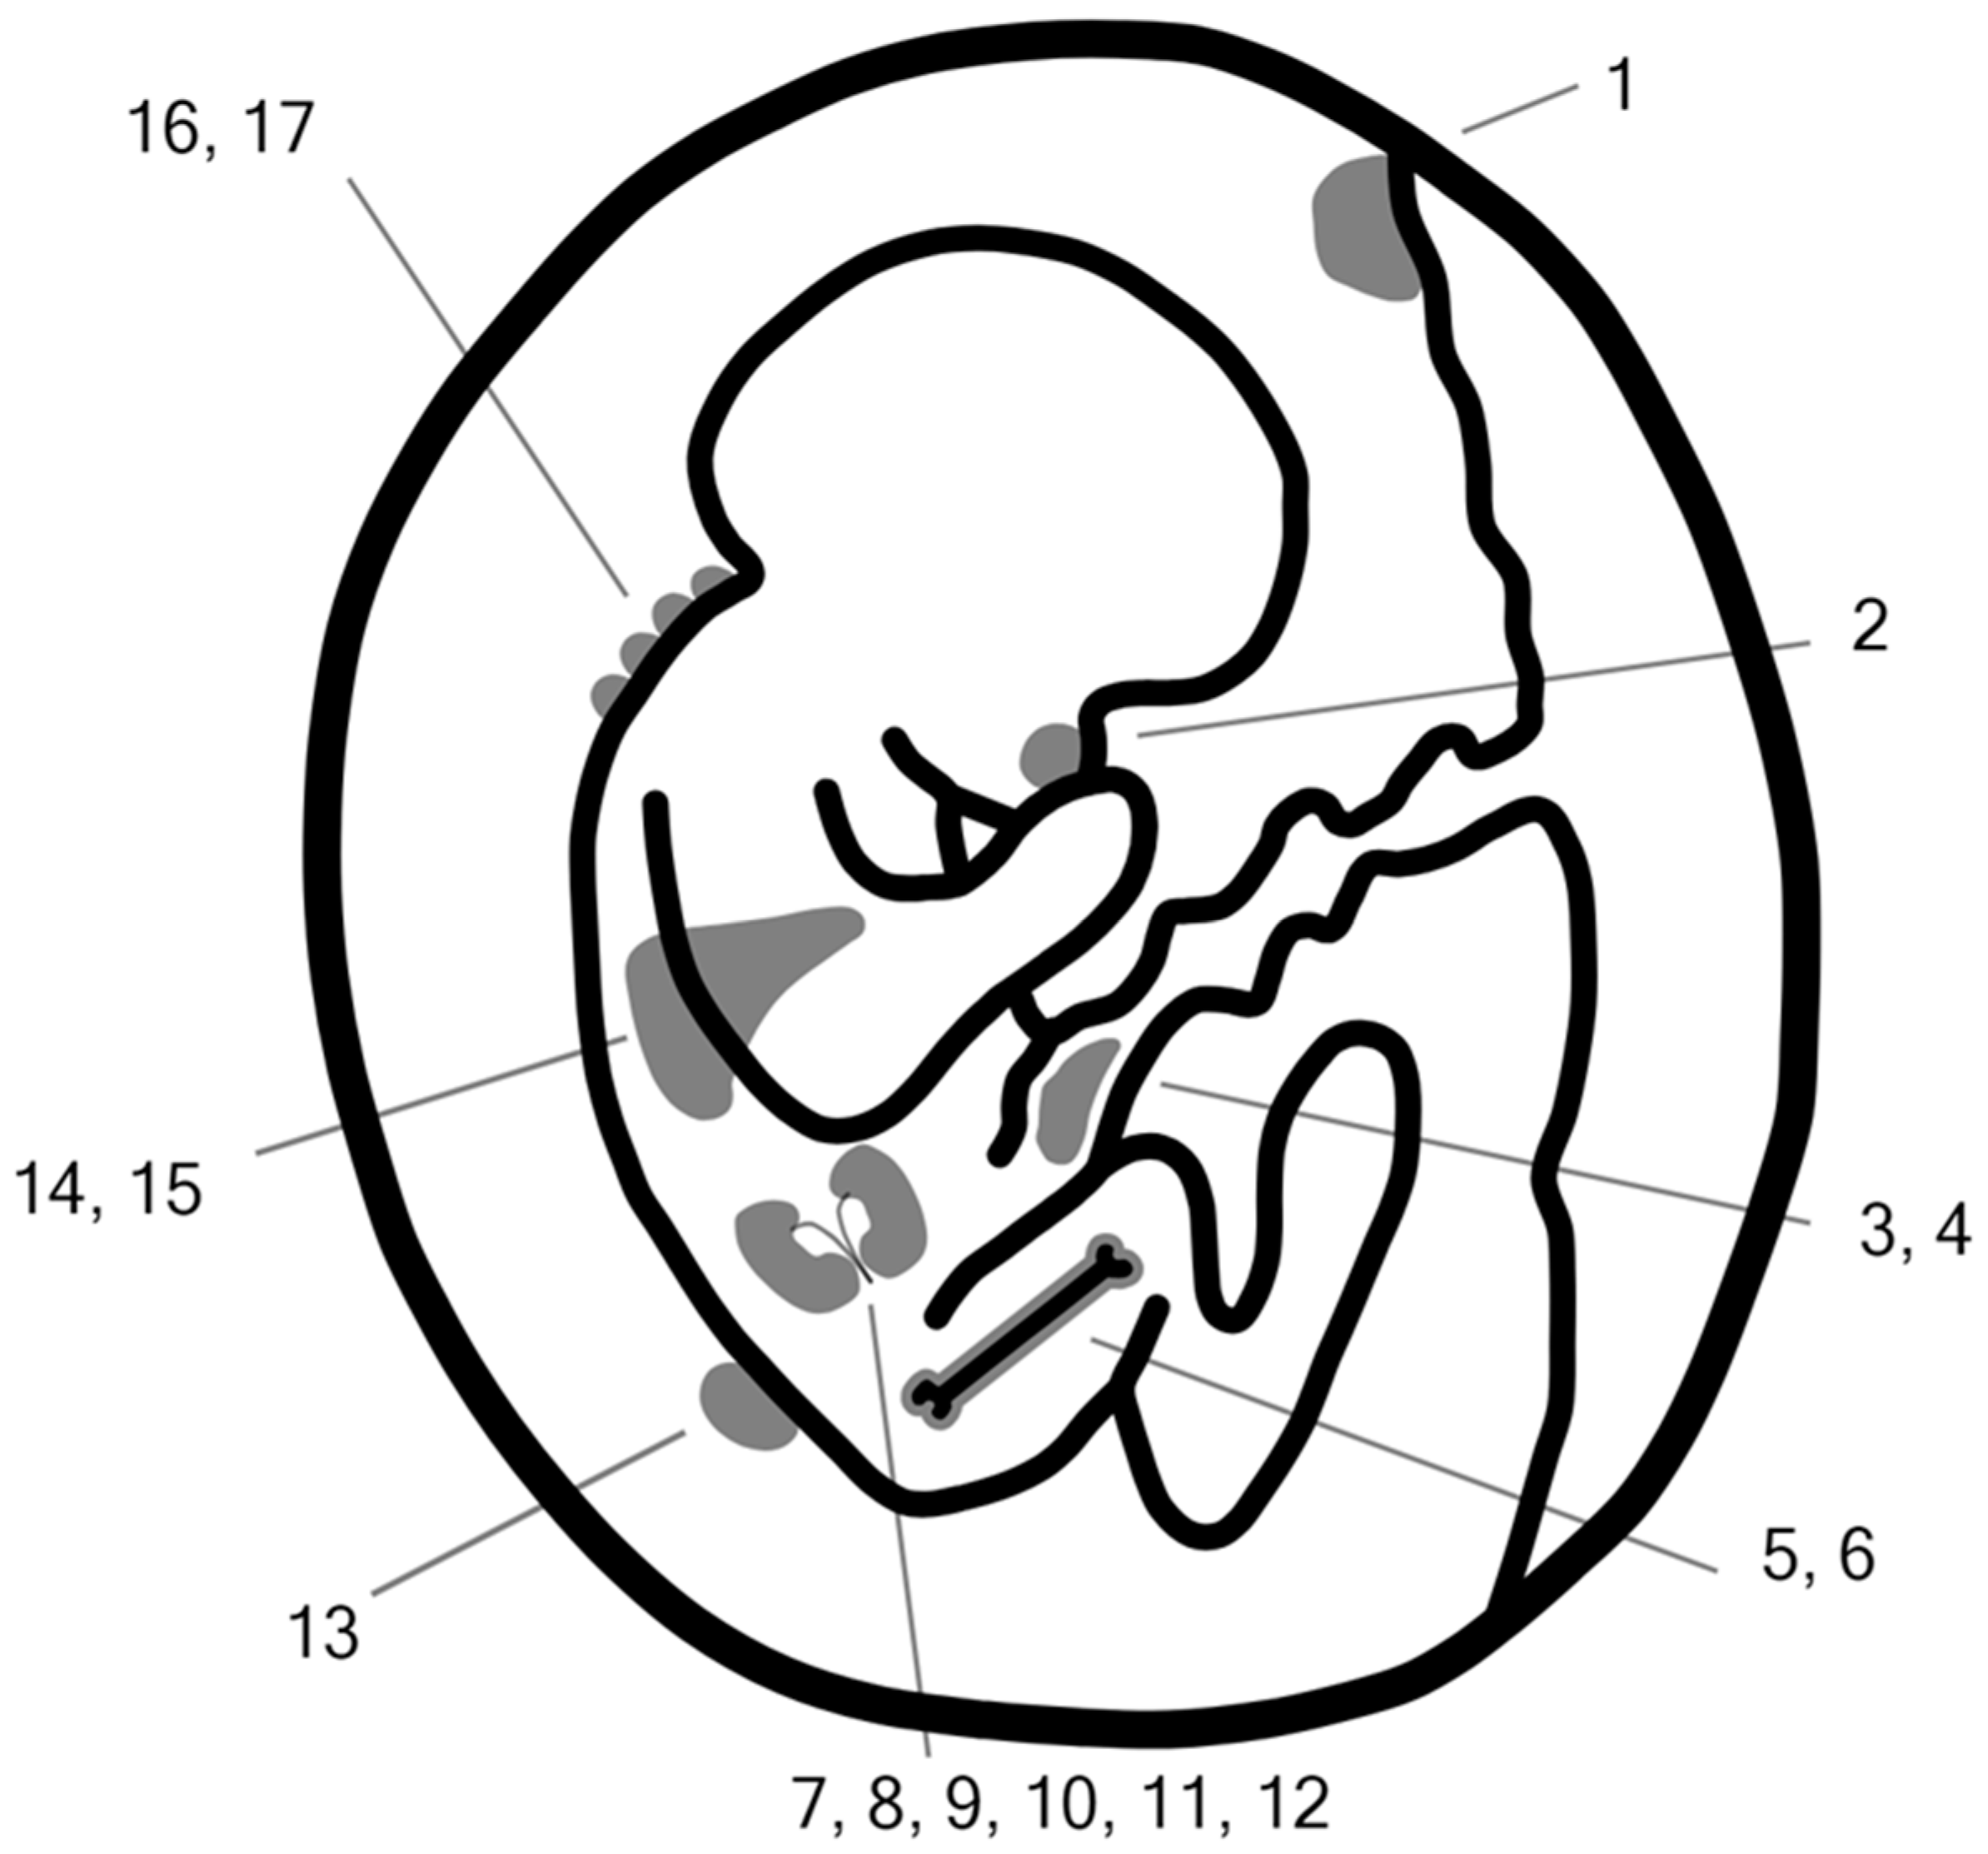 Icons For Early Pregnancy Symptoms Pregnant Thin Urination Vector, Pregnant,  Thin, Urination PNG and Vector with Transparent Background for Free Download